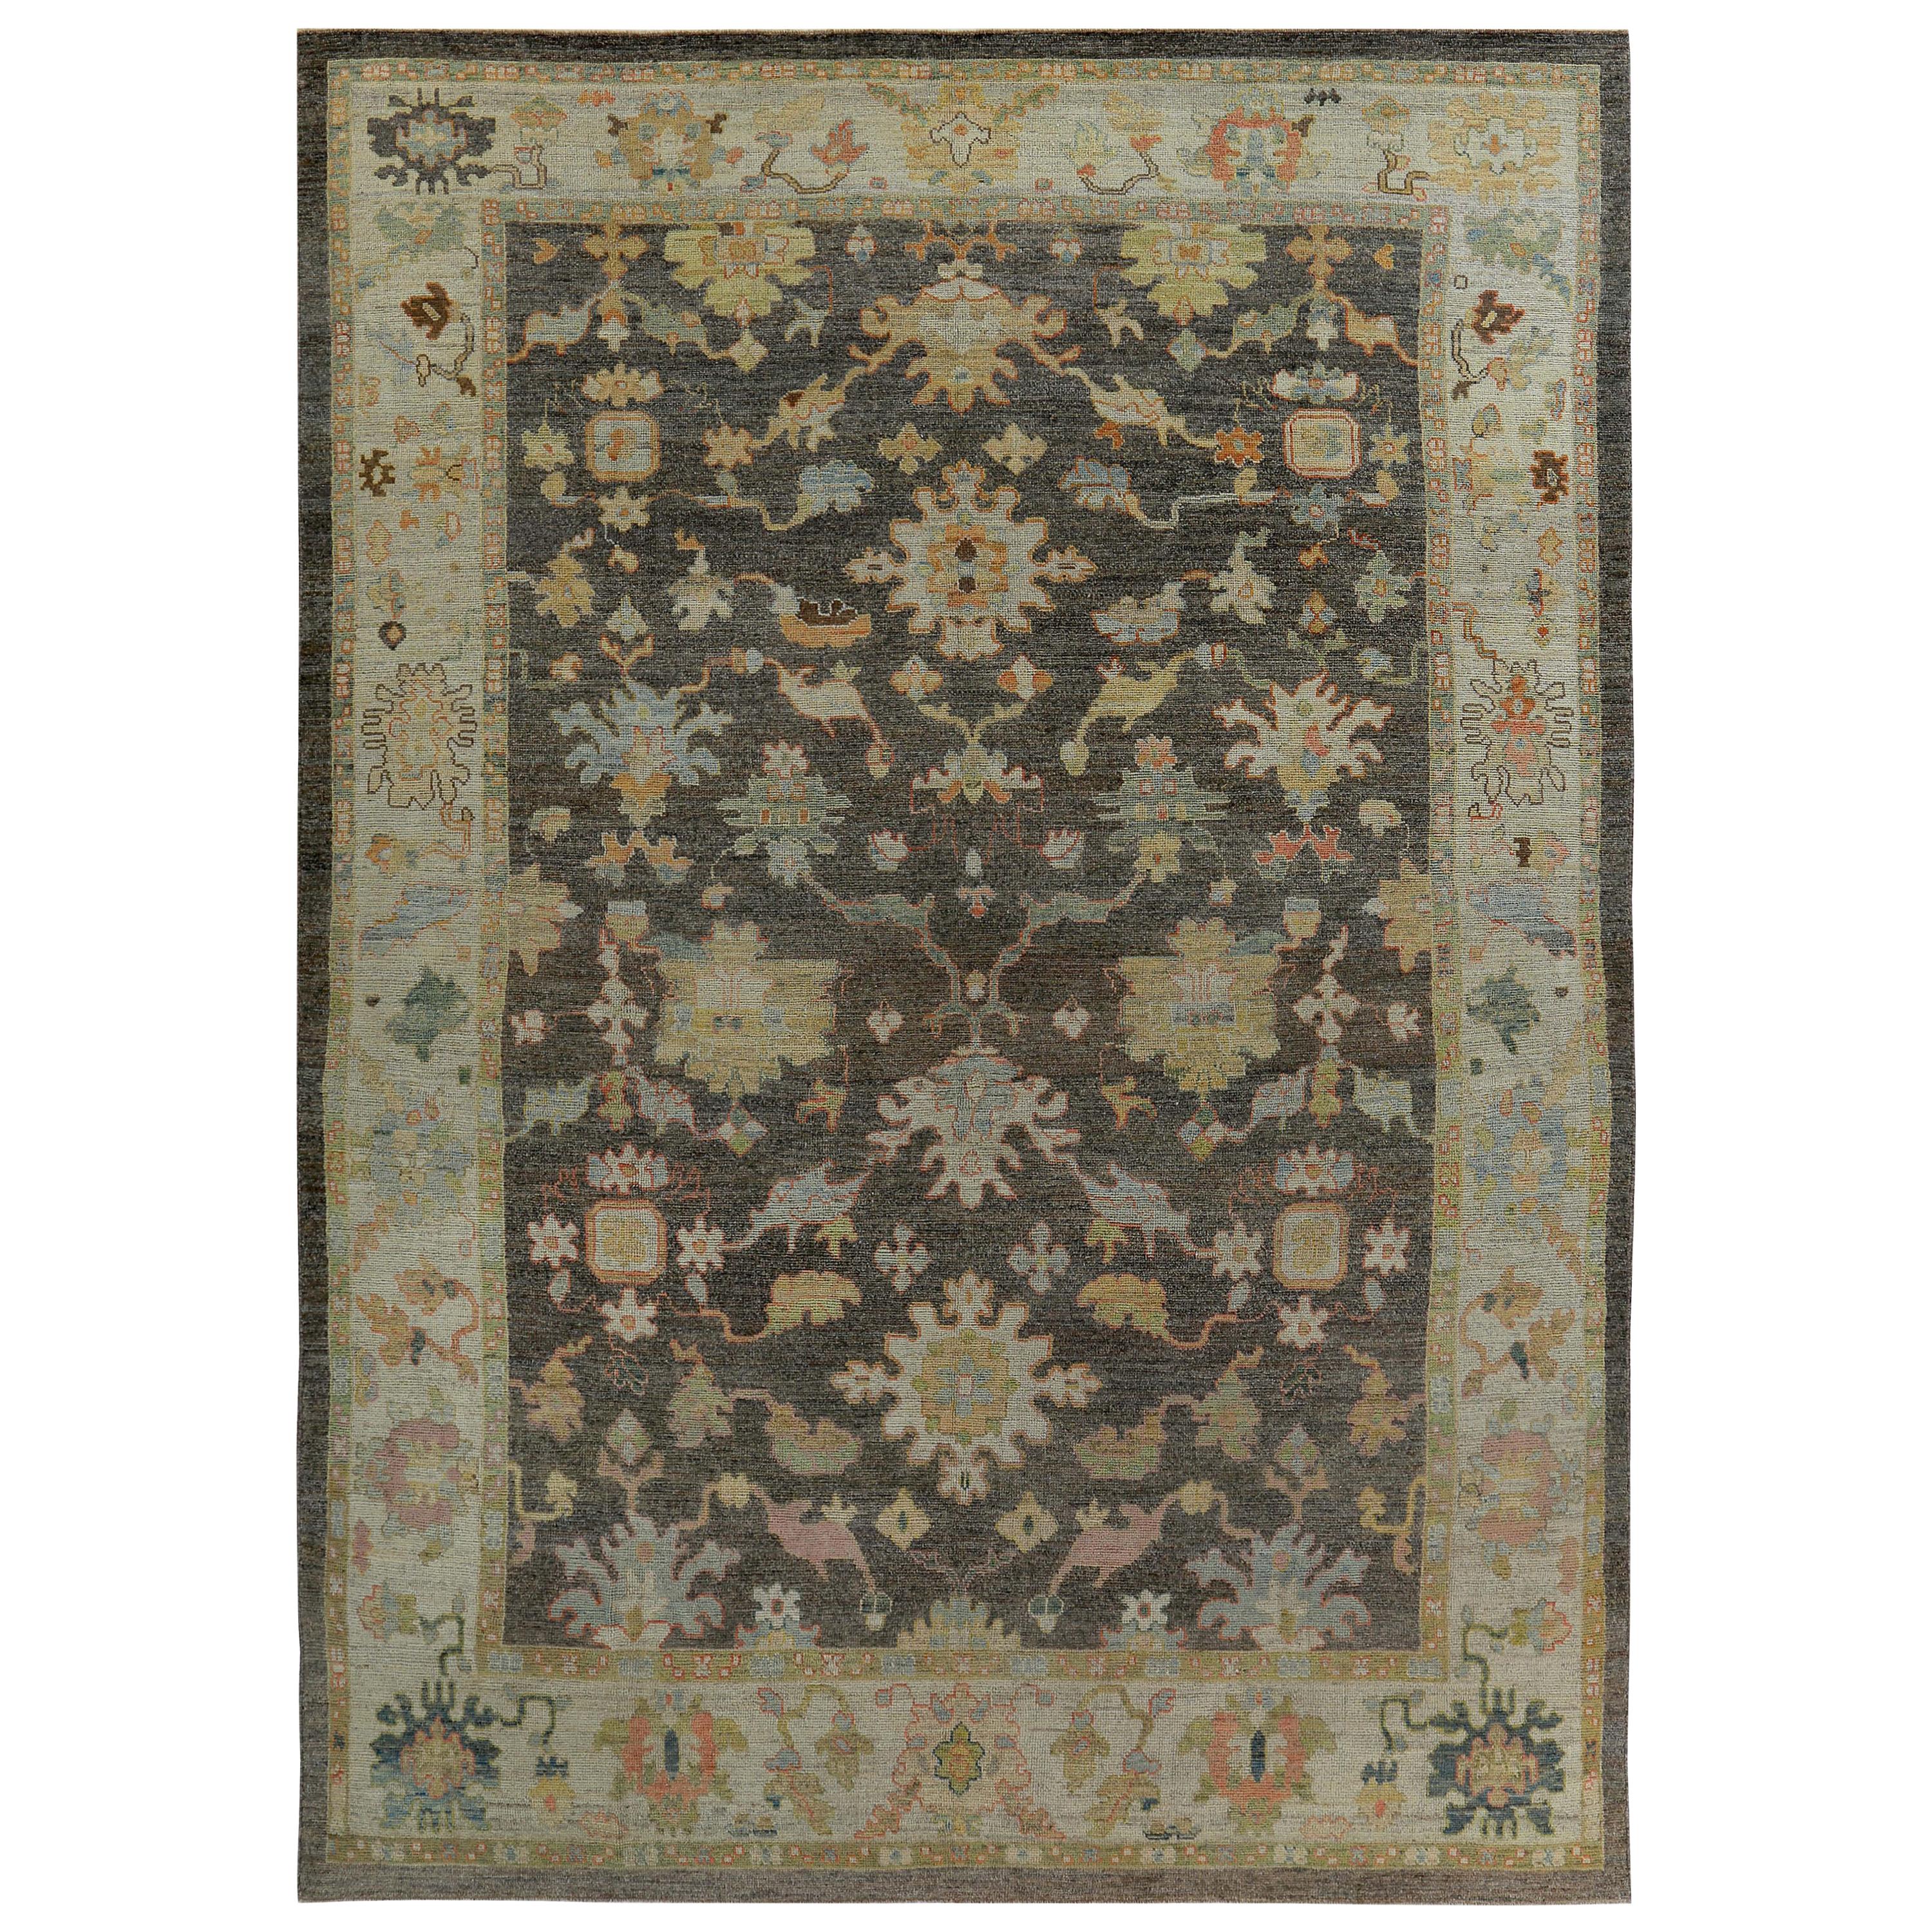 Turkish Oushak Rug with Pink and Blue Floral Details on Ivory and Brown Field